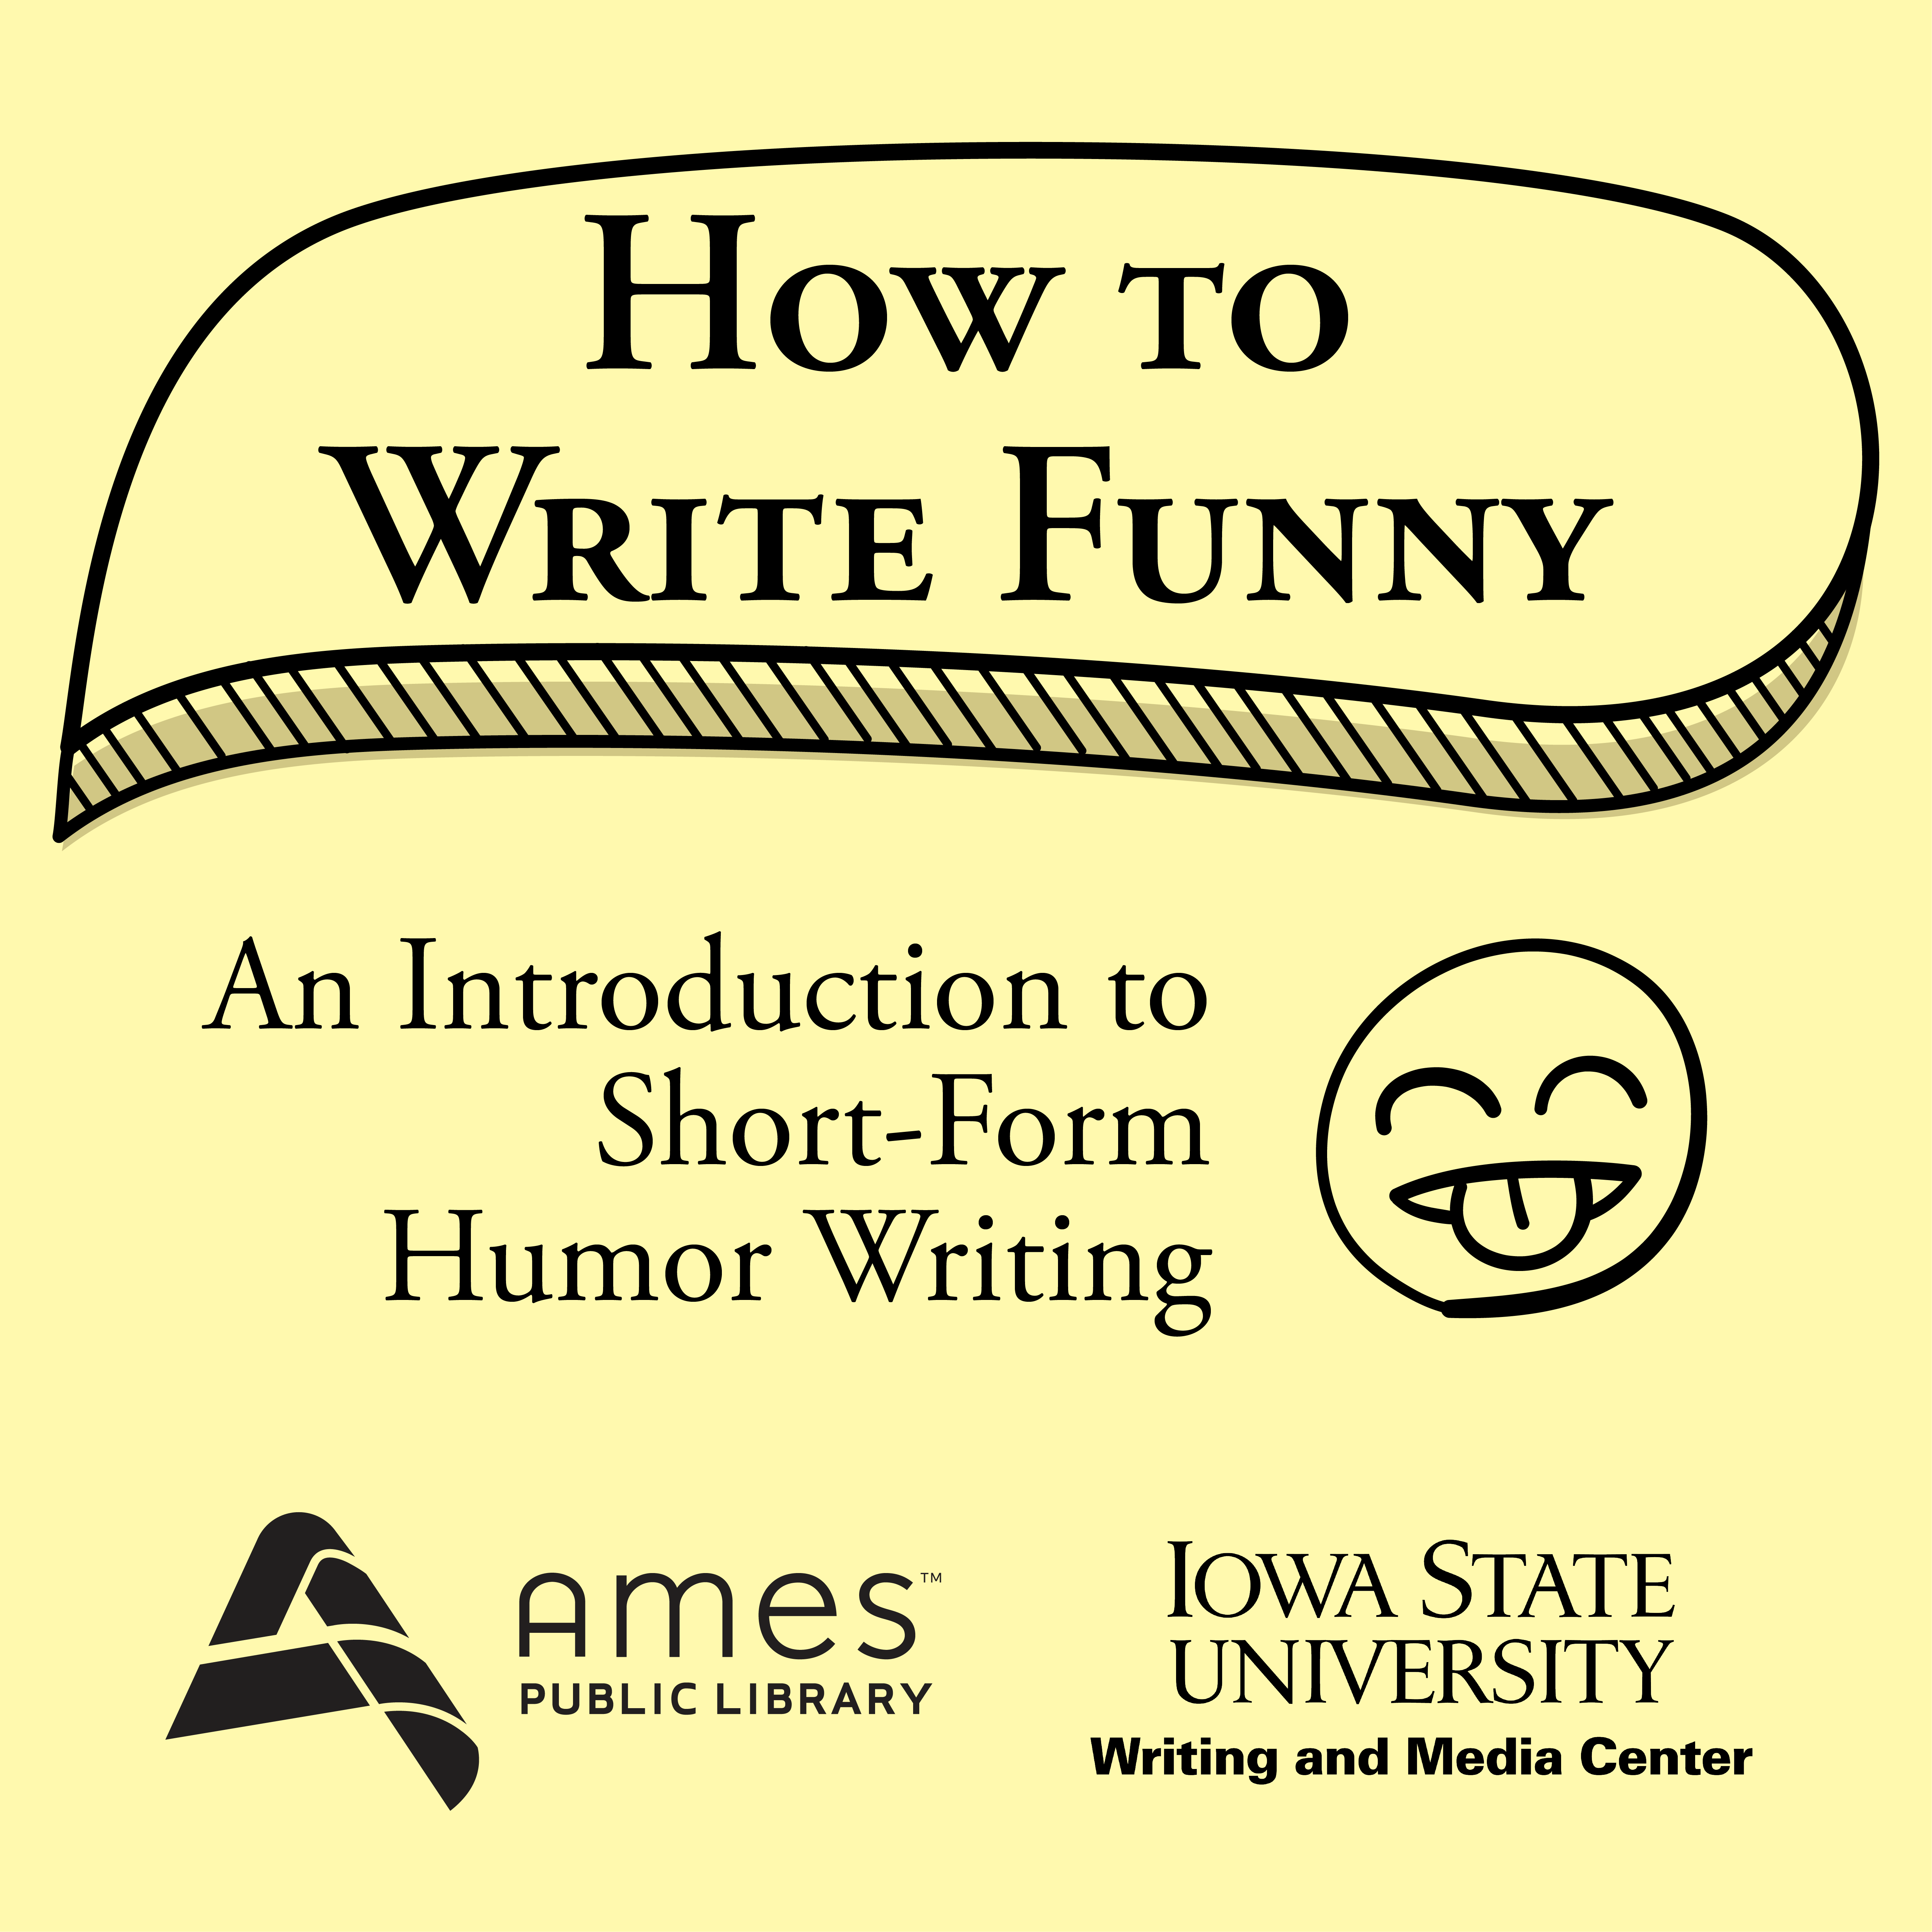 How to Write Funny: An Introduction to Short-Form Humor Writing